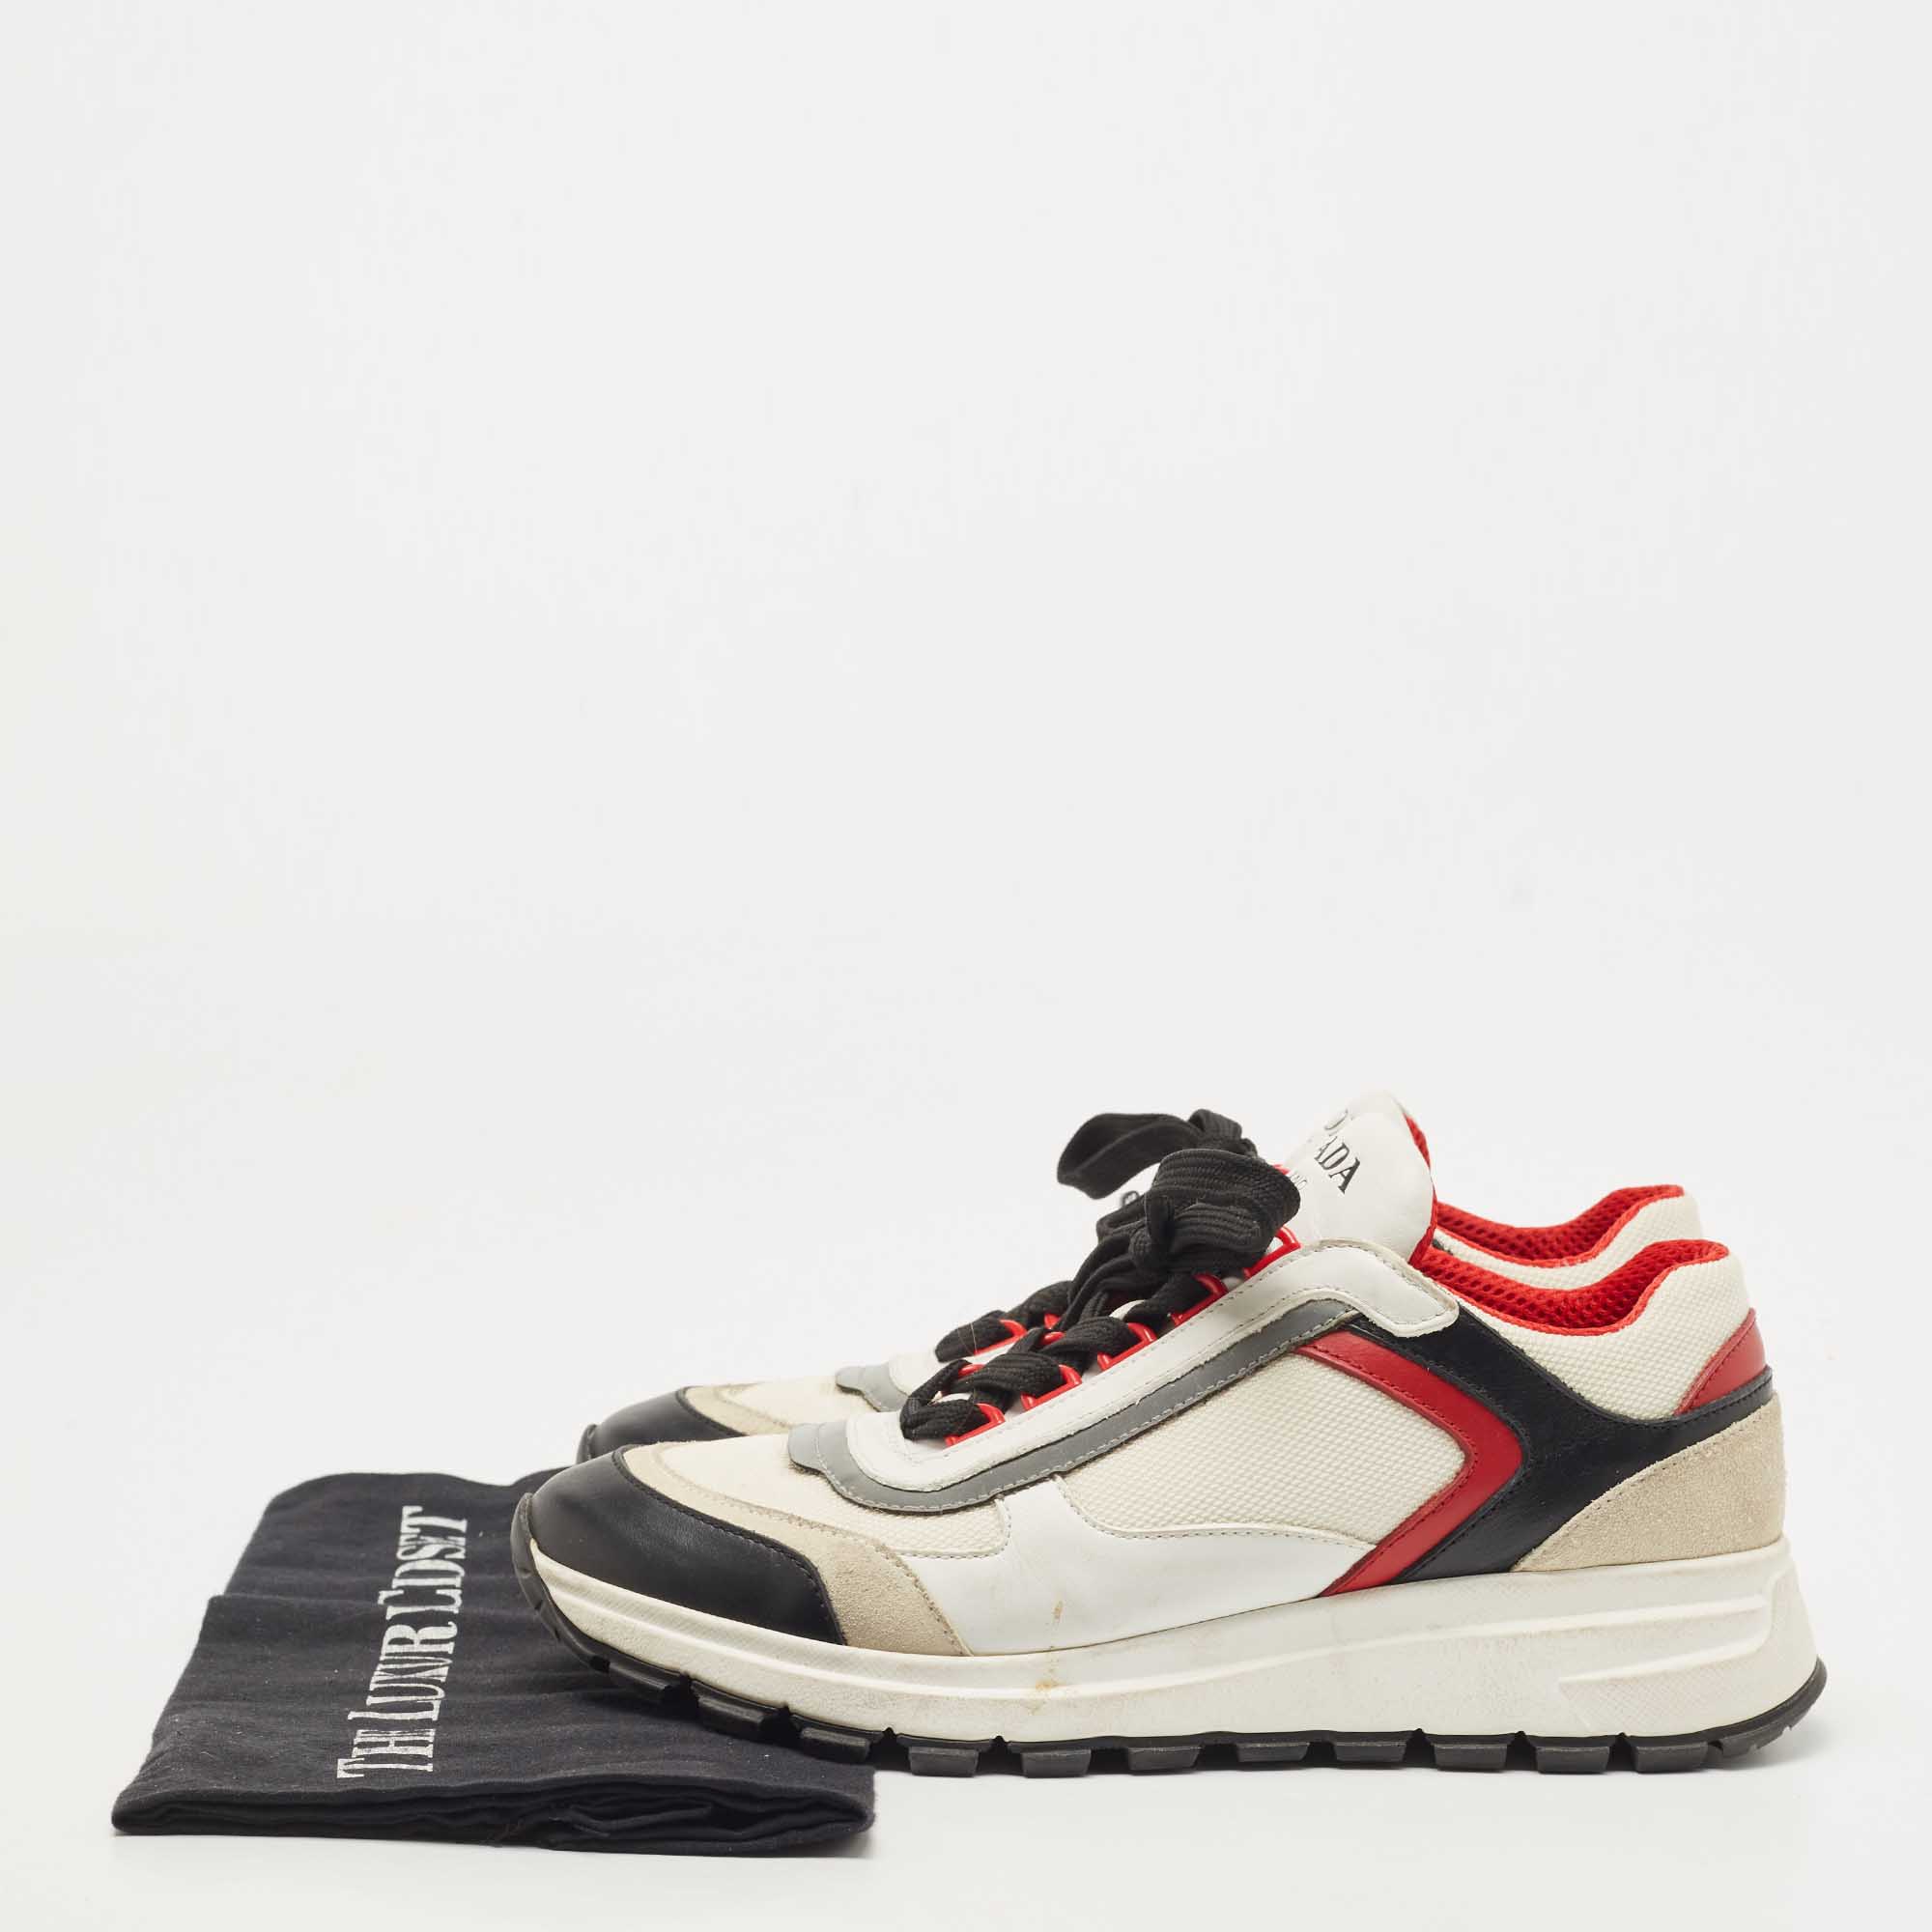 Prada Tricolor Mesh And Leather Low Top Sneakers Size 38